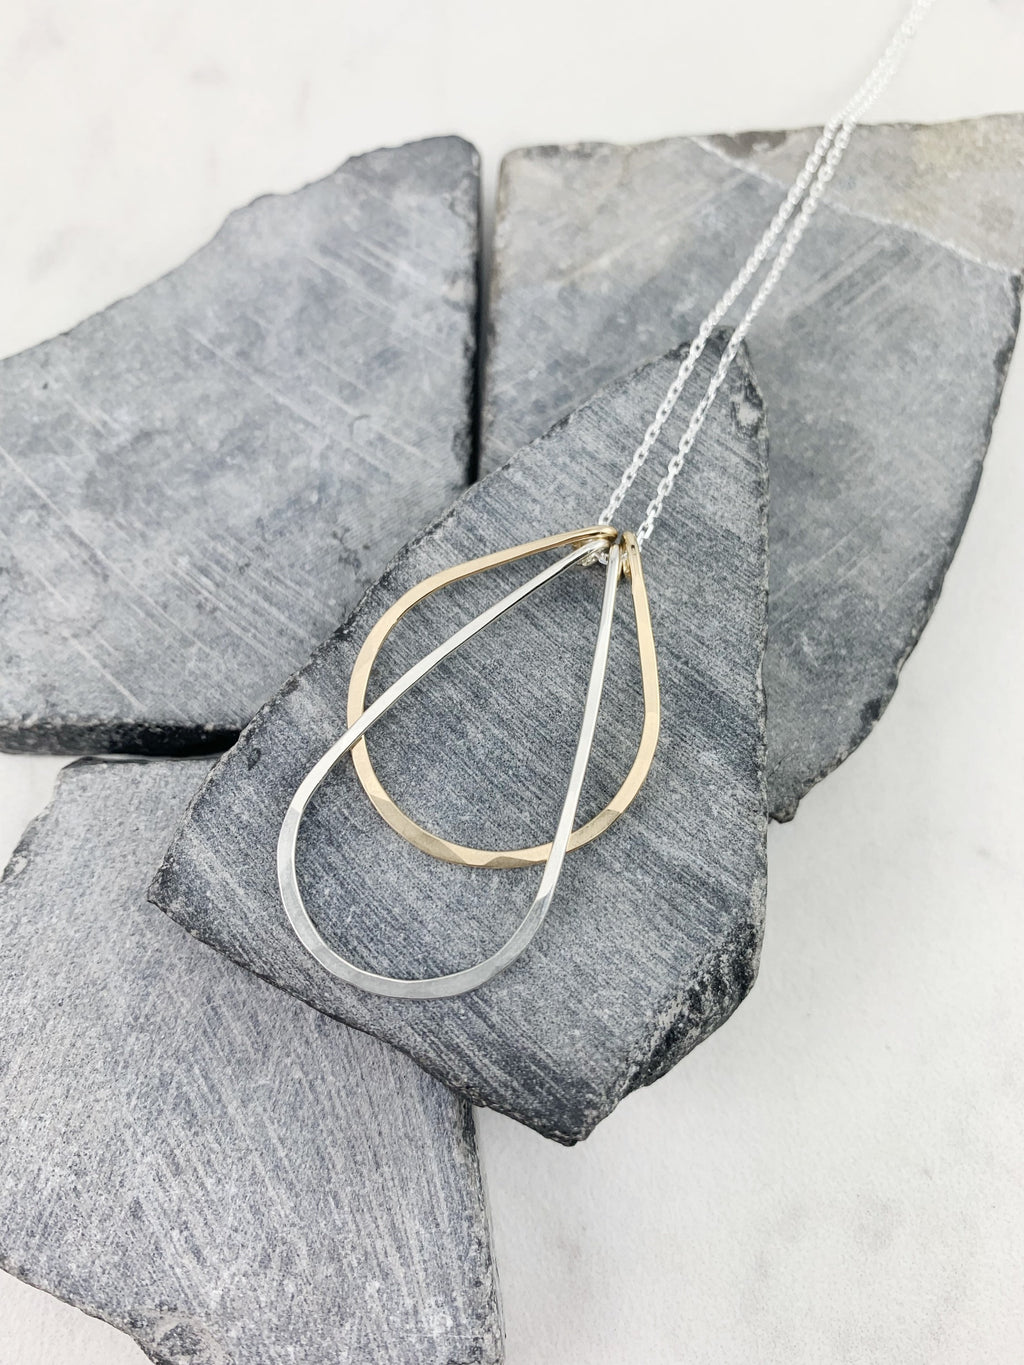 Yellow Gold and Sterling Silver Arches Necklace, Art Deco Necklace, Mixed Metal Necklace, Gold and Silver Necklace, Teardrop Necklace